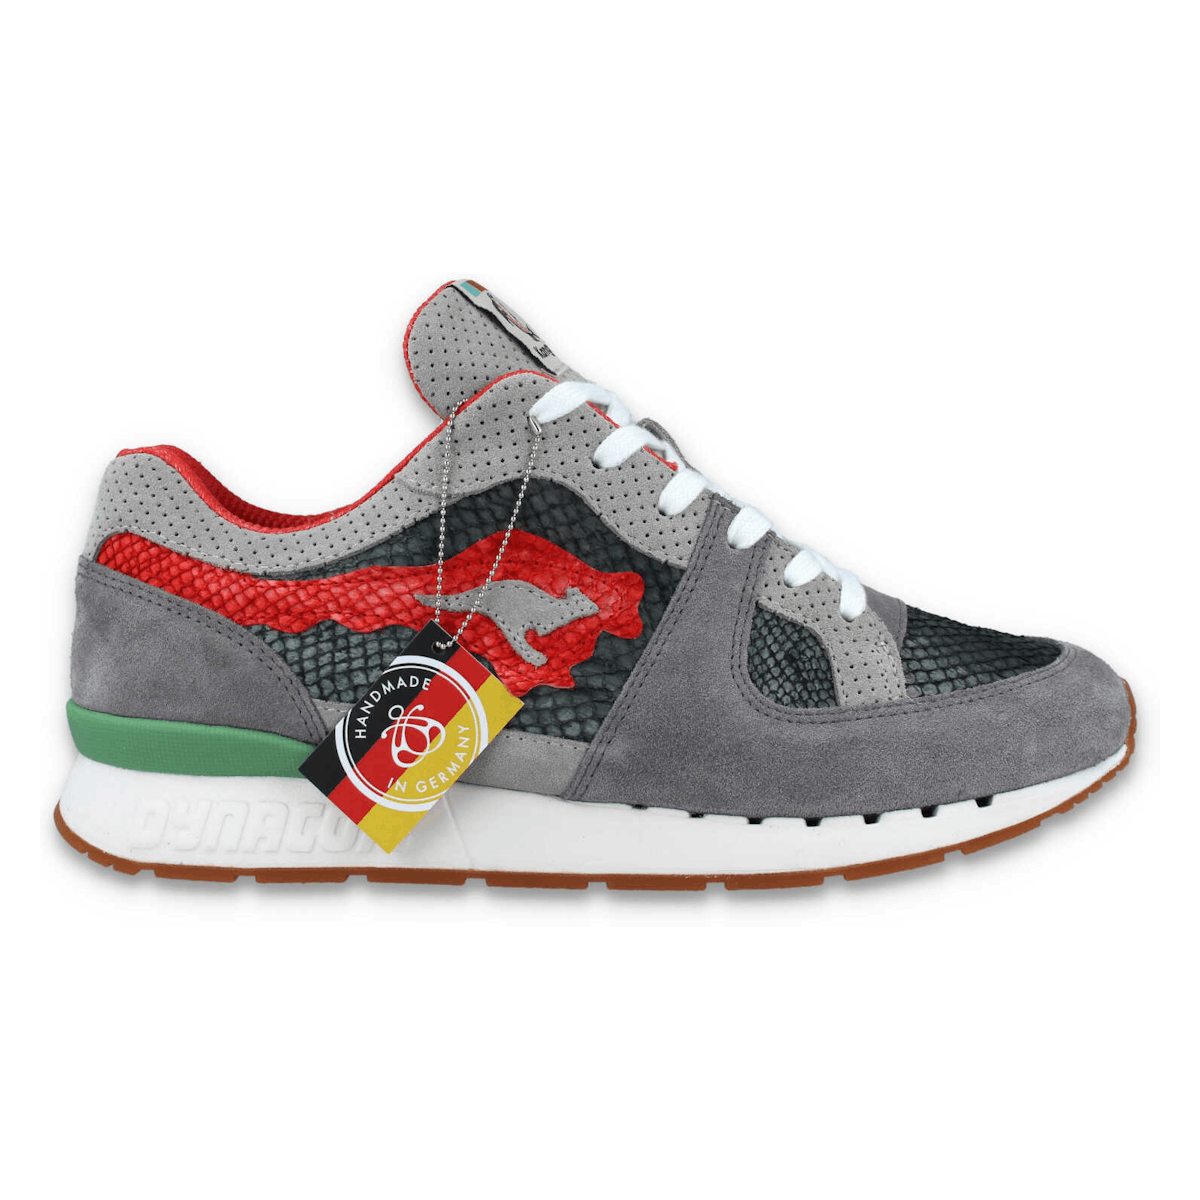 KangaROOS Coil R1 X SELECTA BISSO - Trout II MiG